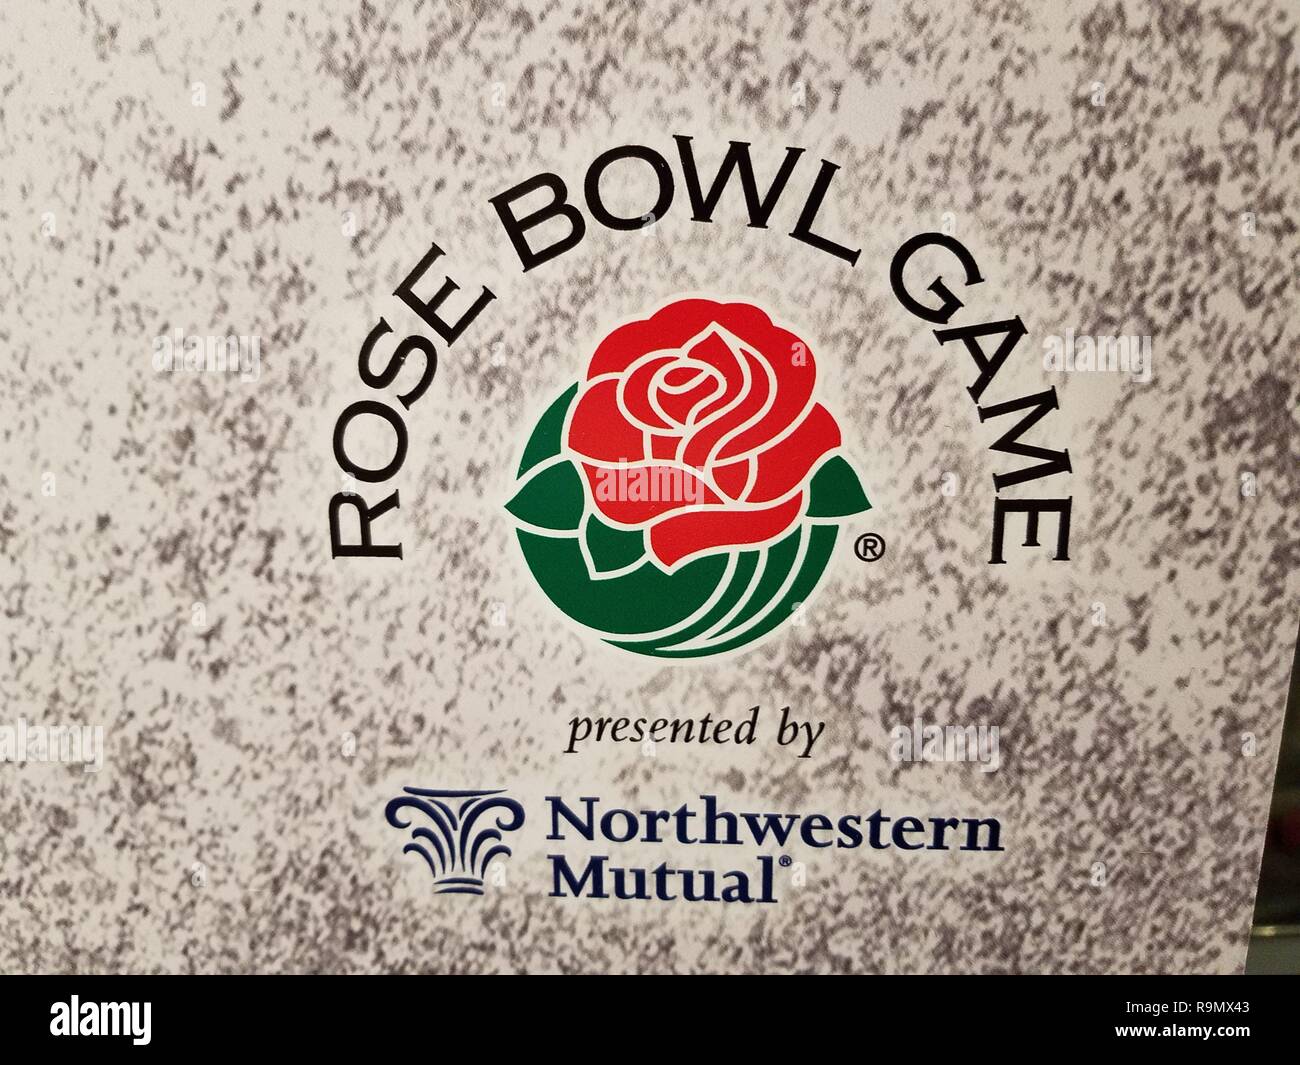 Los Angeles, CA. The Rose Bowl presented by Northwest Mutual got to a quick start, as both the Buckeyes, and the Huskies arrive in Los Angeles, these are small samples of art work of the Rose Bowl presented by Northwest Mutual, in a L.A. Hotel, in Downtown Los Angeles, on December 26, 2018. (Photo by: Jose Marin/MarinMedia.org/Cal Sport Media) ( Complete Photo & Company Credit Required) Stock Photo